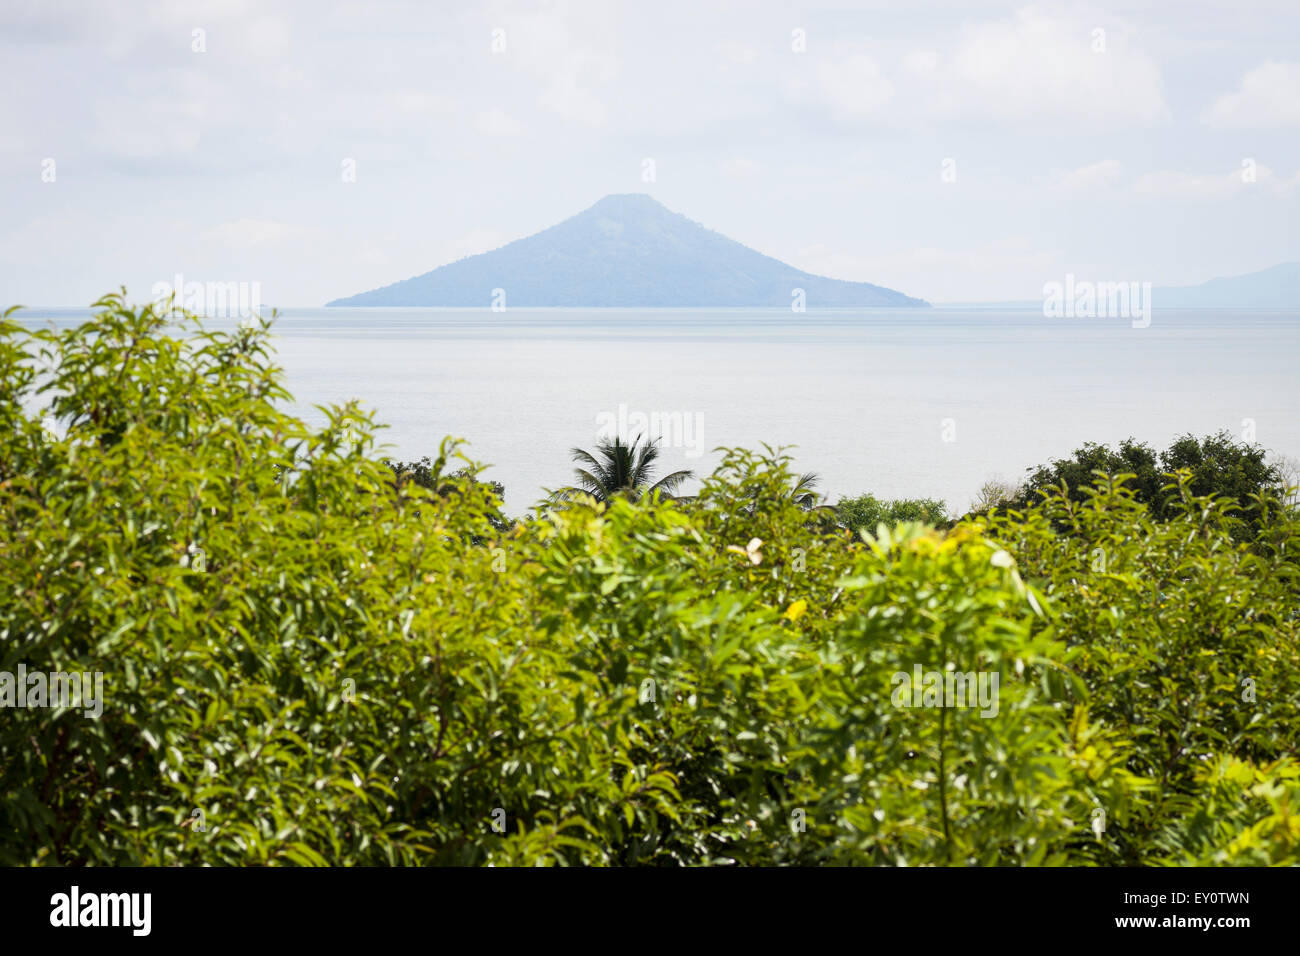 Momotombo volcano and Lake Managua viewed from the Ruins of León Viejo, Nicaragua Stock Photo